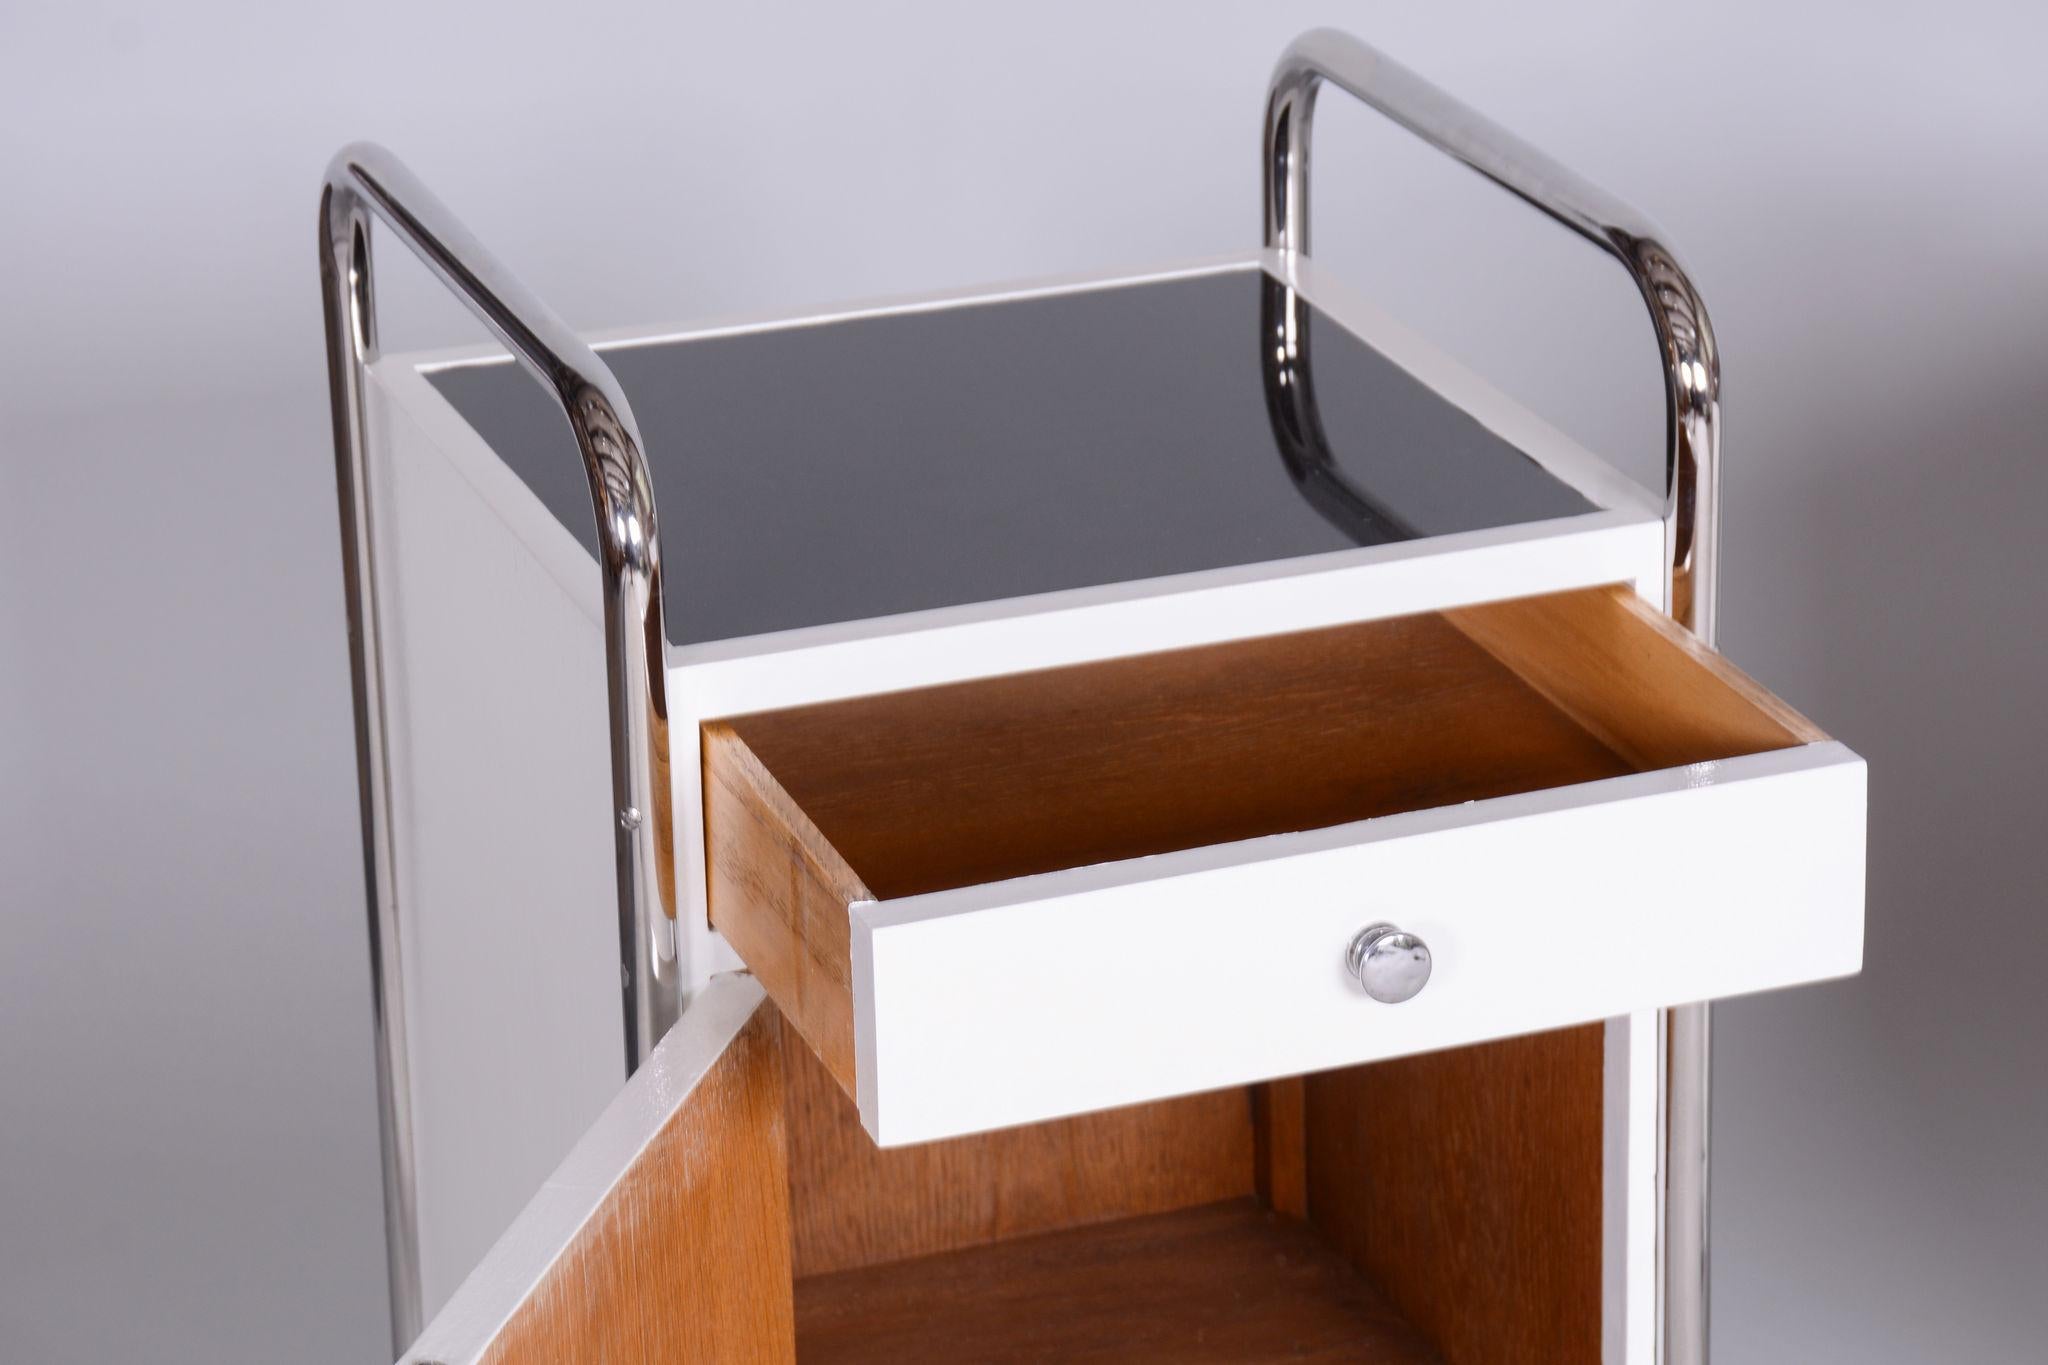 Mid-20th Century Restored Bauhaus Pair of Bedside Tables, Vichr a spol, Chrome, Czechia, 1930s For Sale